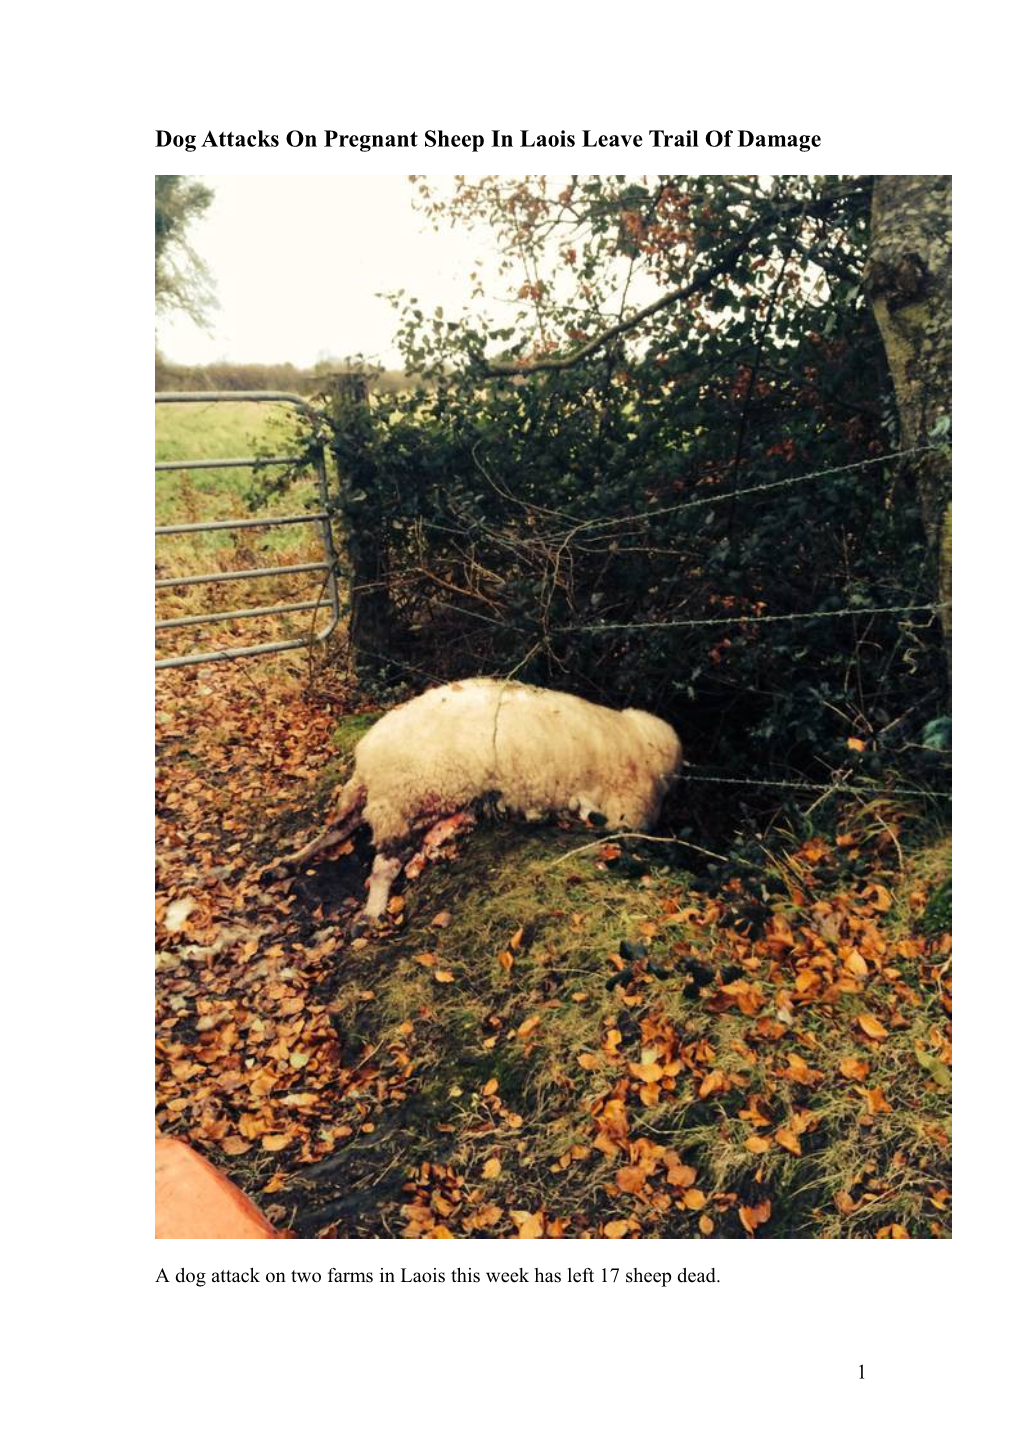 Dog Attacks on Pregnant Sheep in Laois Leave Trail of Damage